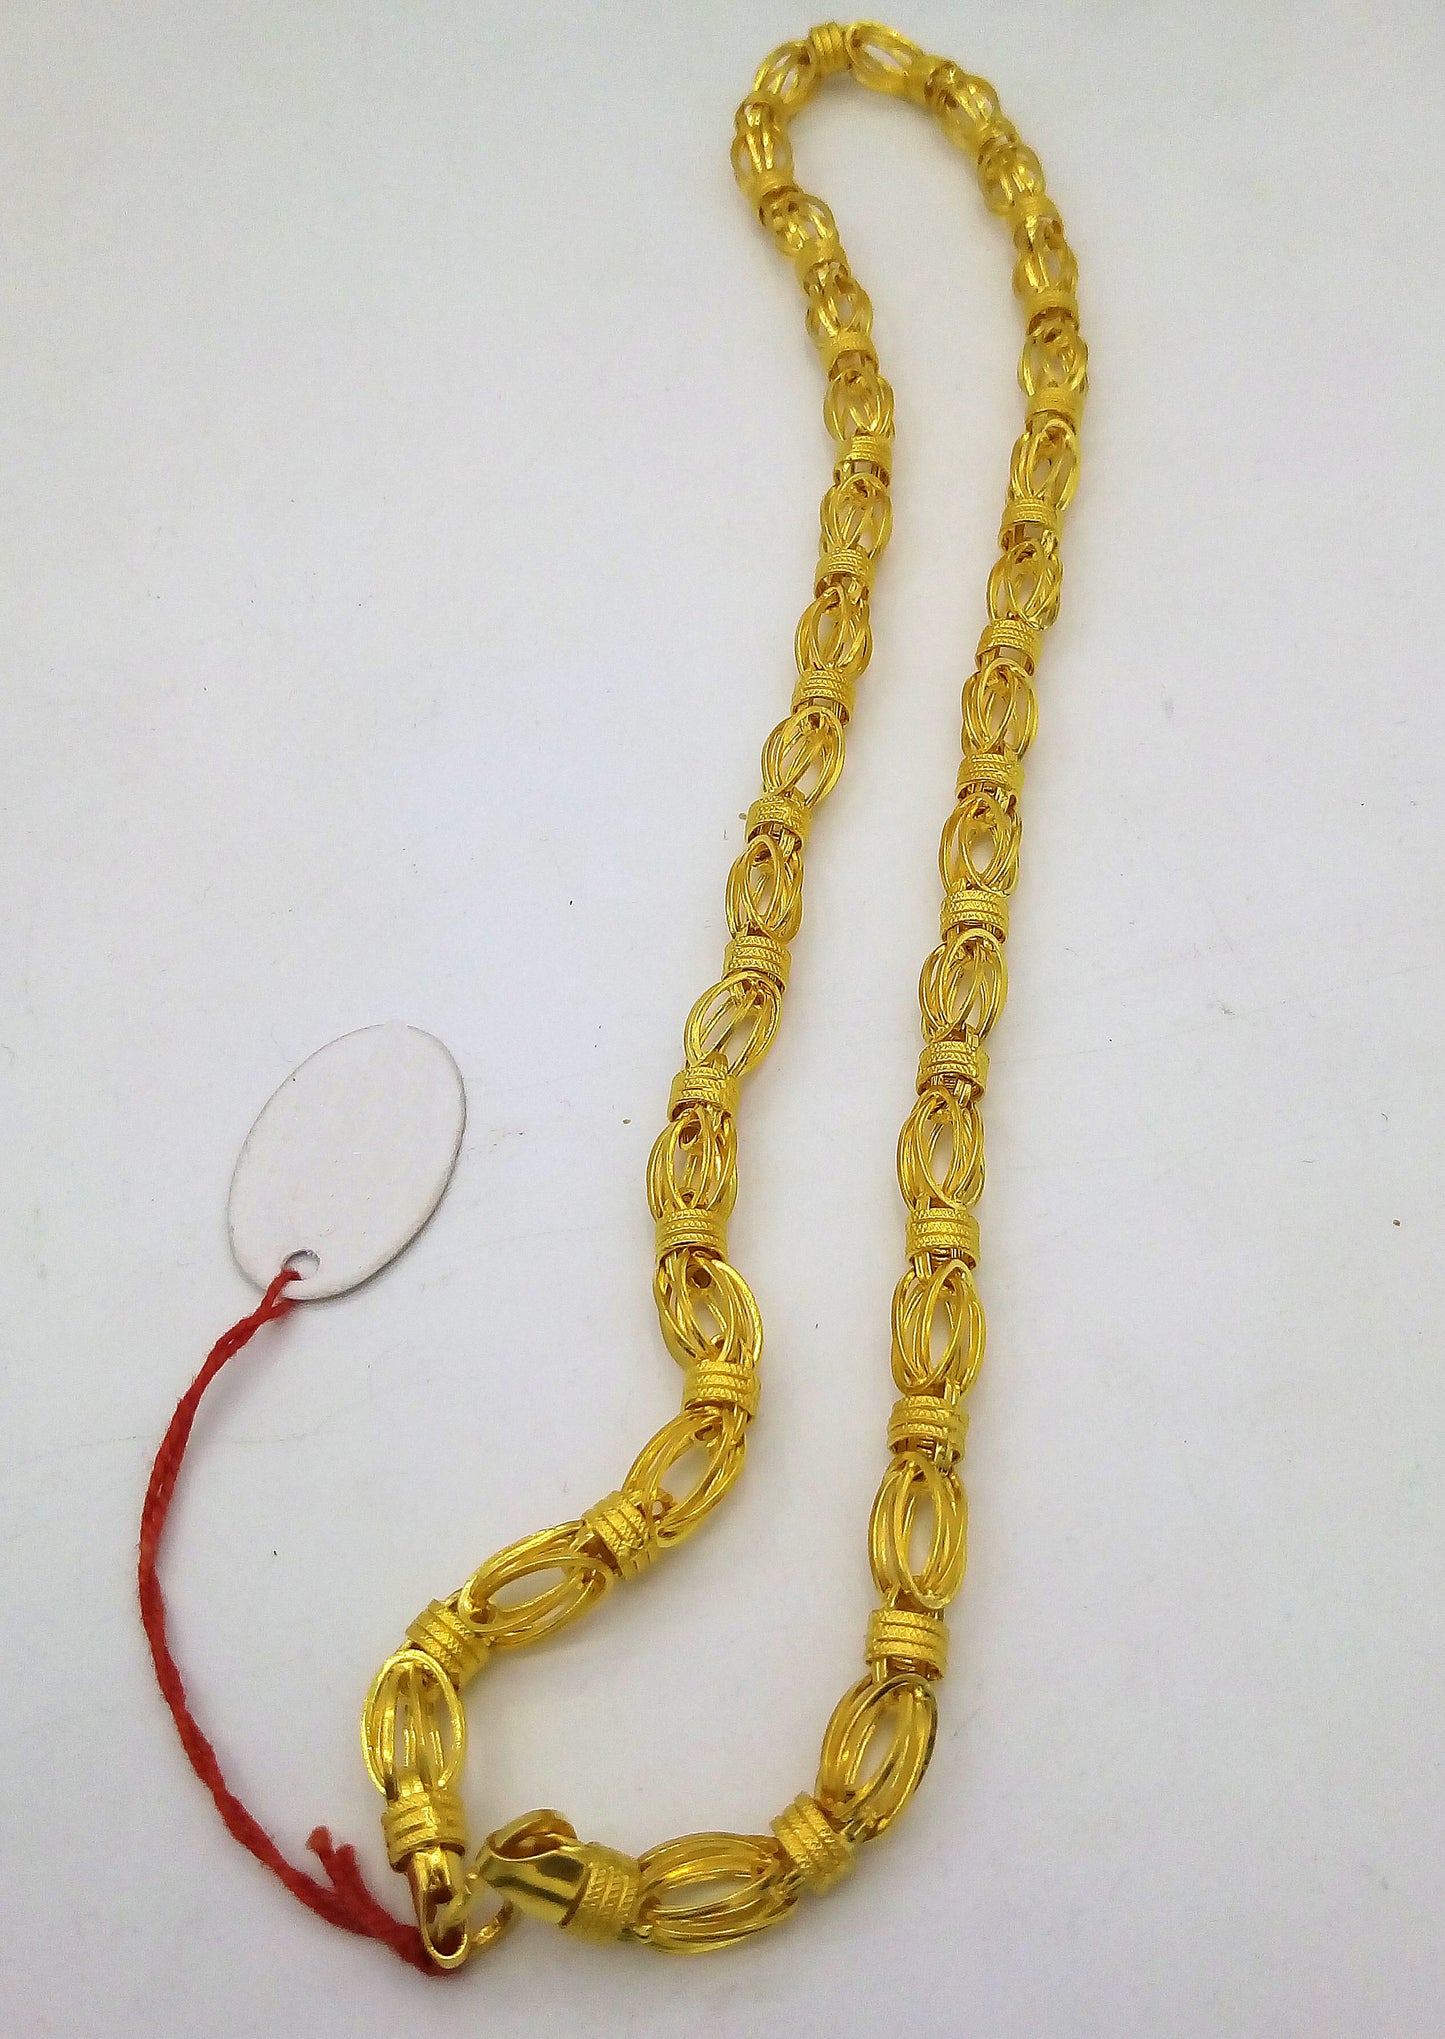 22kt yellow gold handmade fabulous 20 inches chain necklace genuine india jewelry for gifting - TRIBAL ORNAMENTS